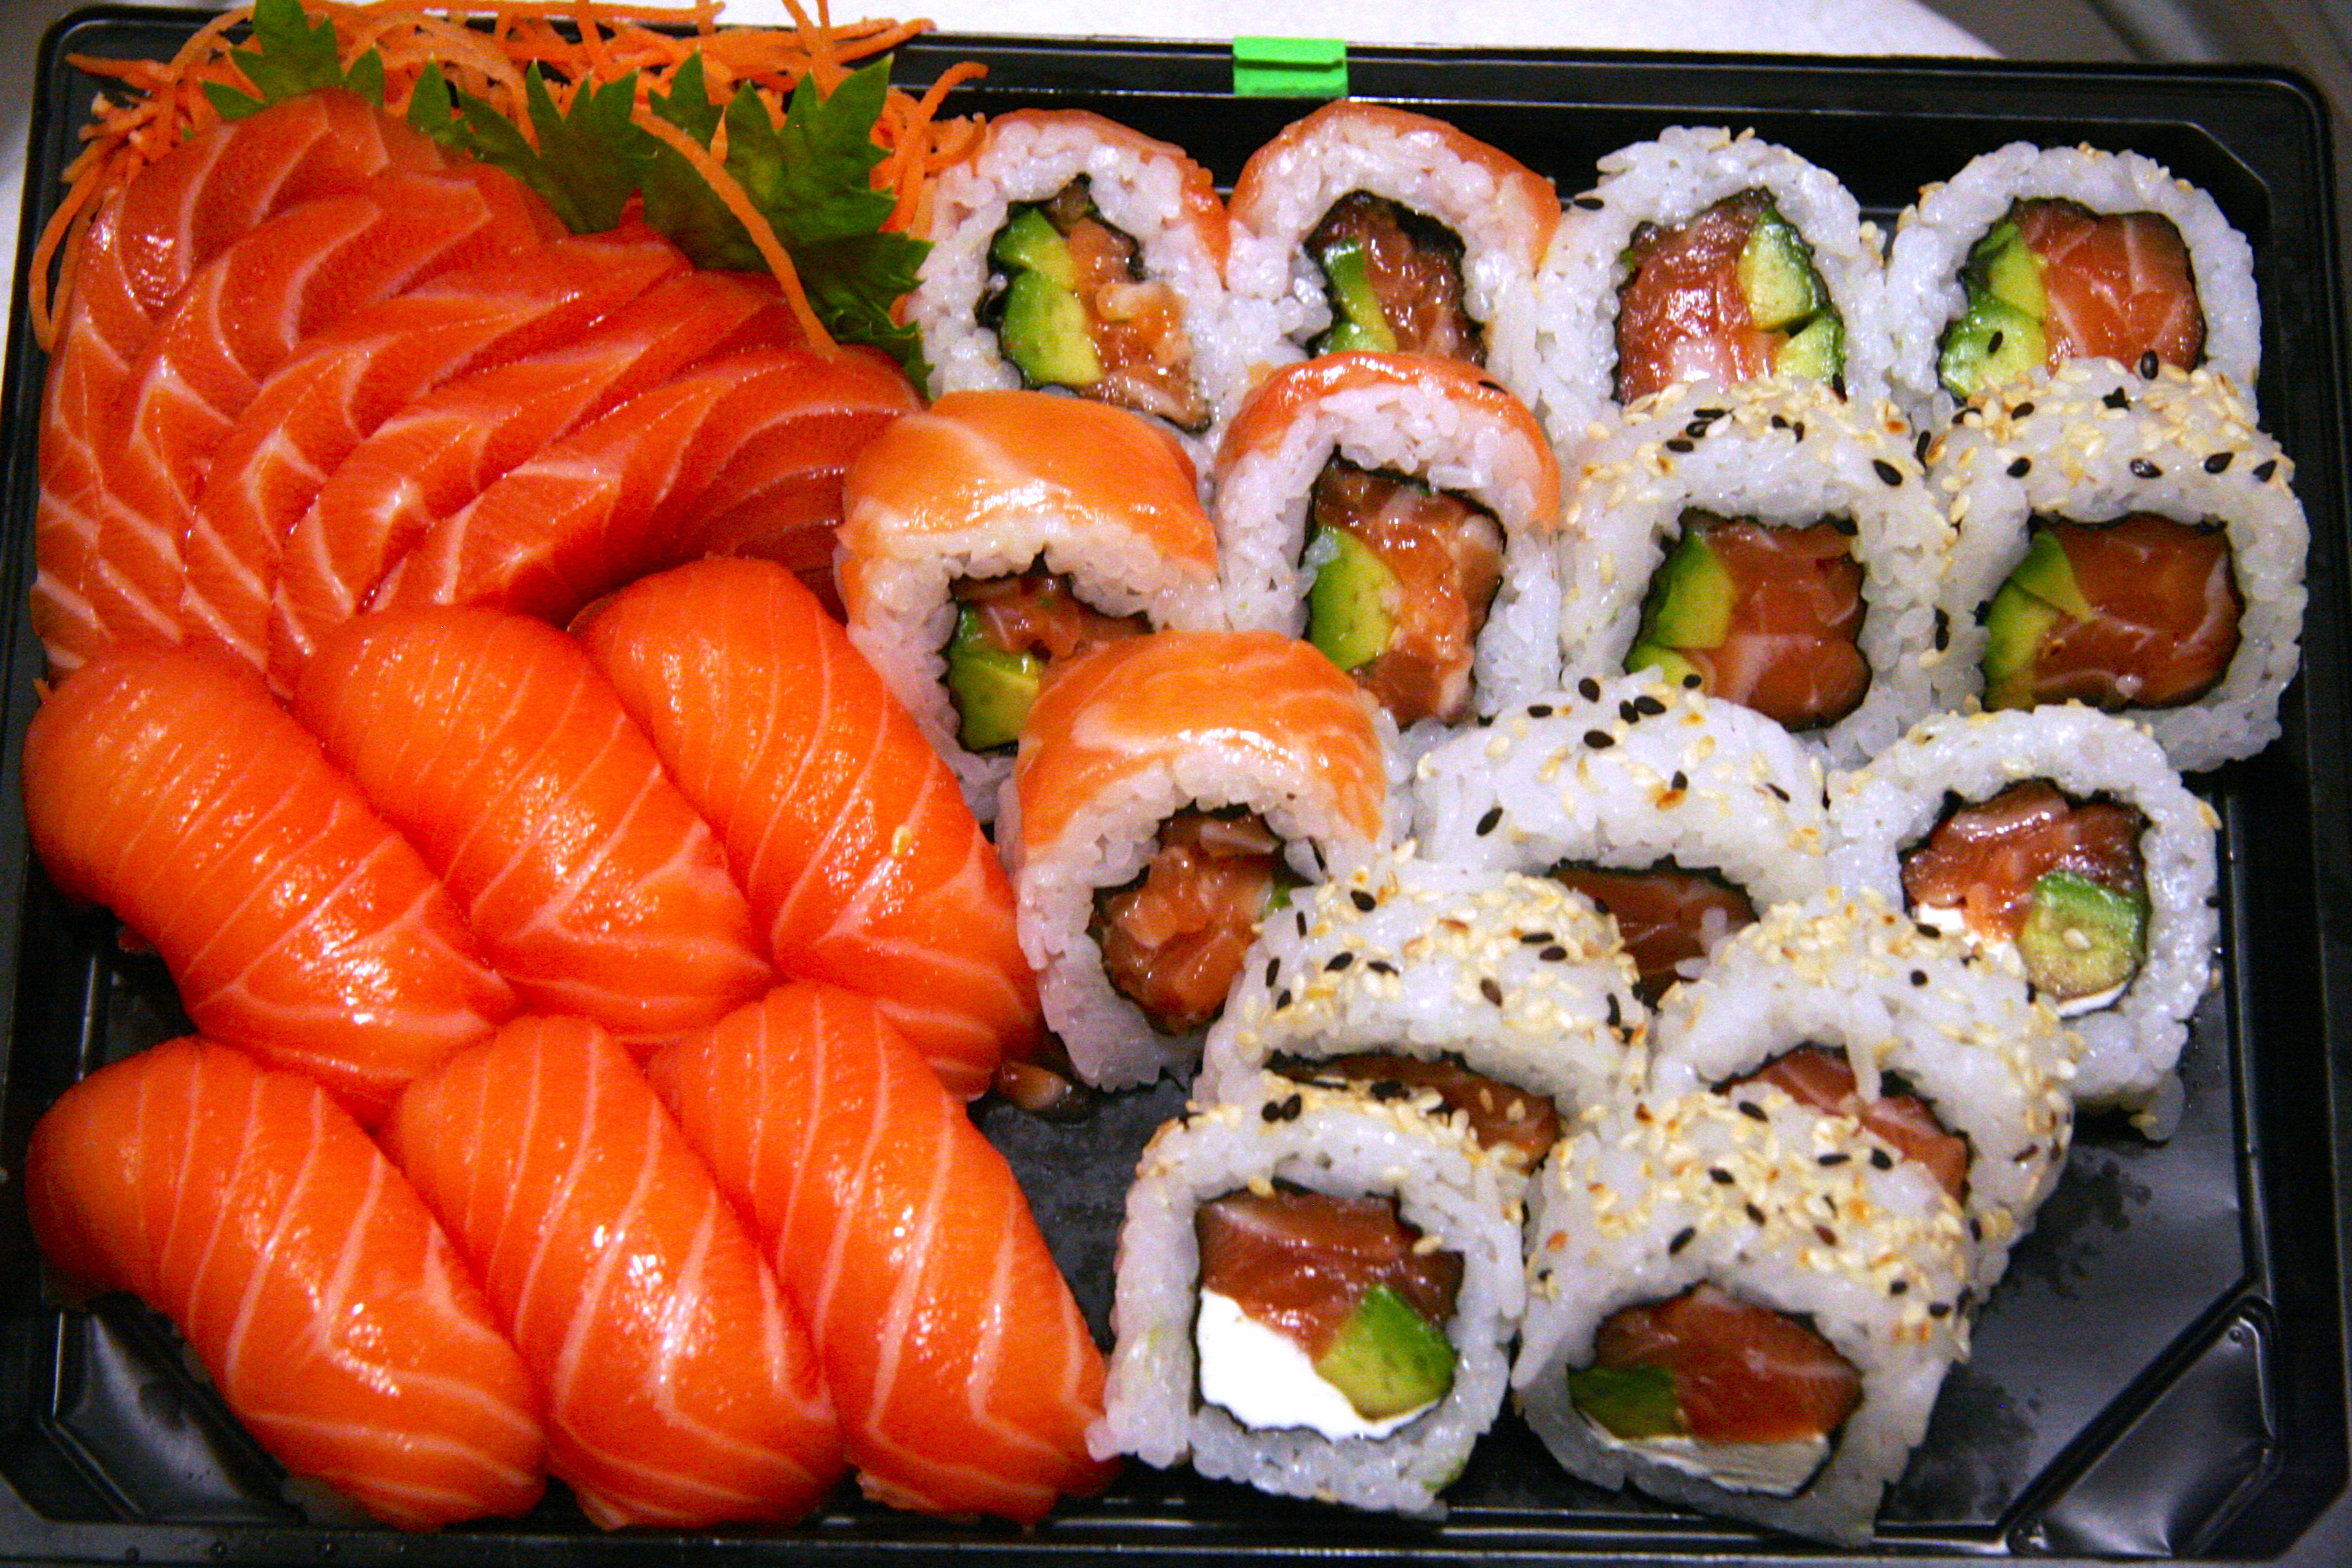 Sushi Delivery: Kokoro Sushi - Pick Up The Fork